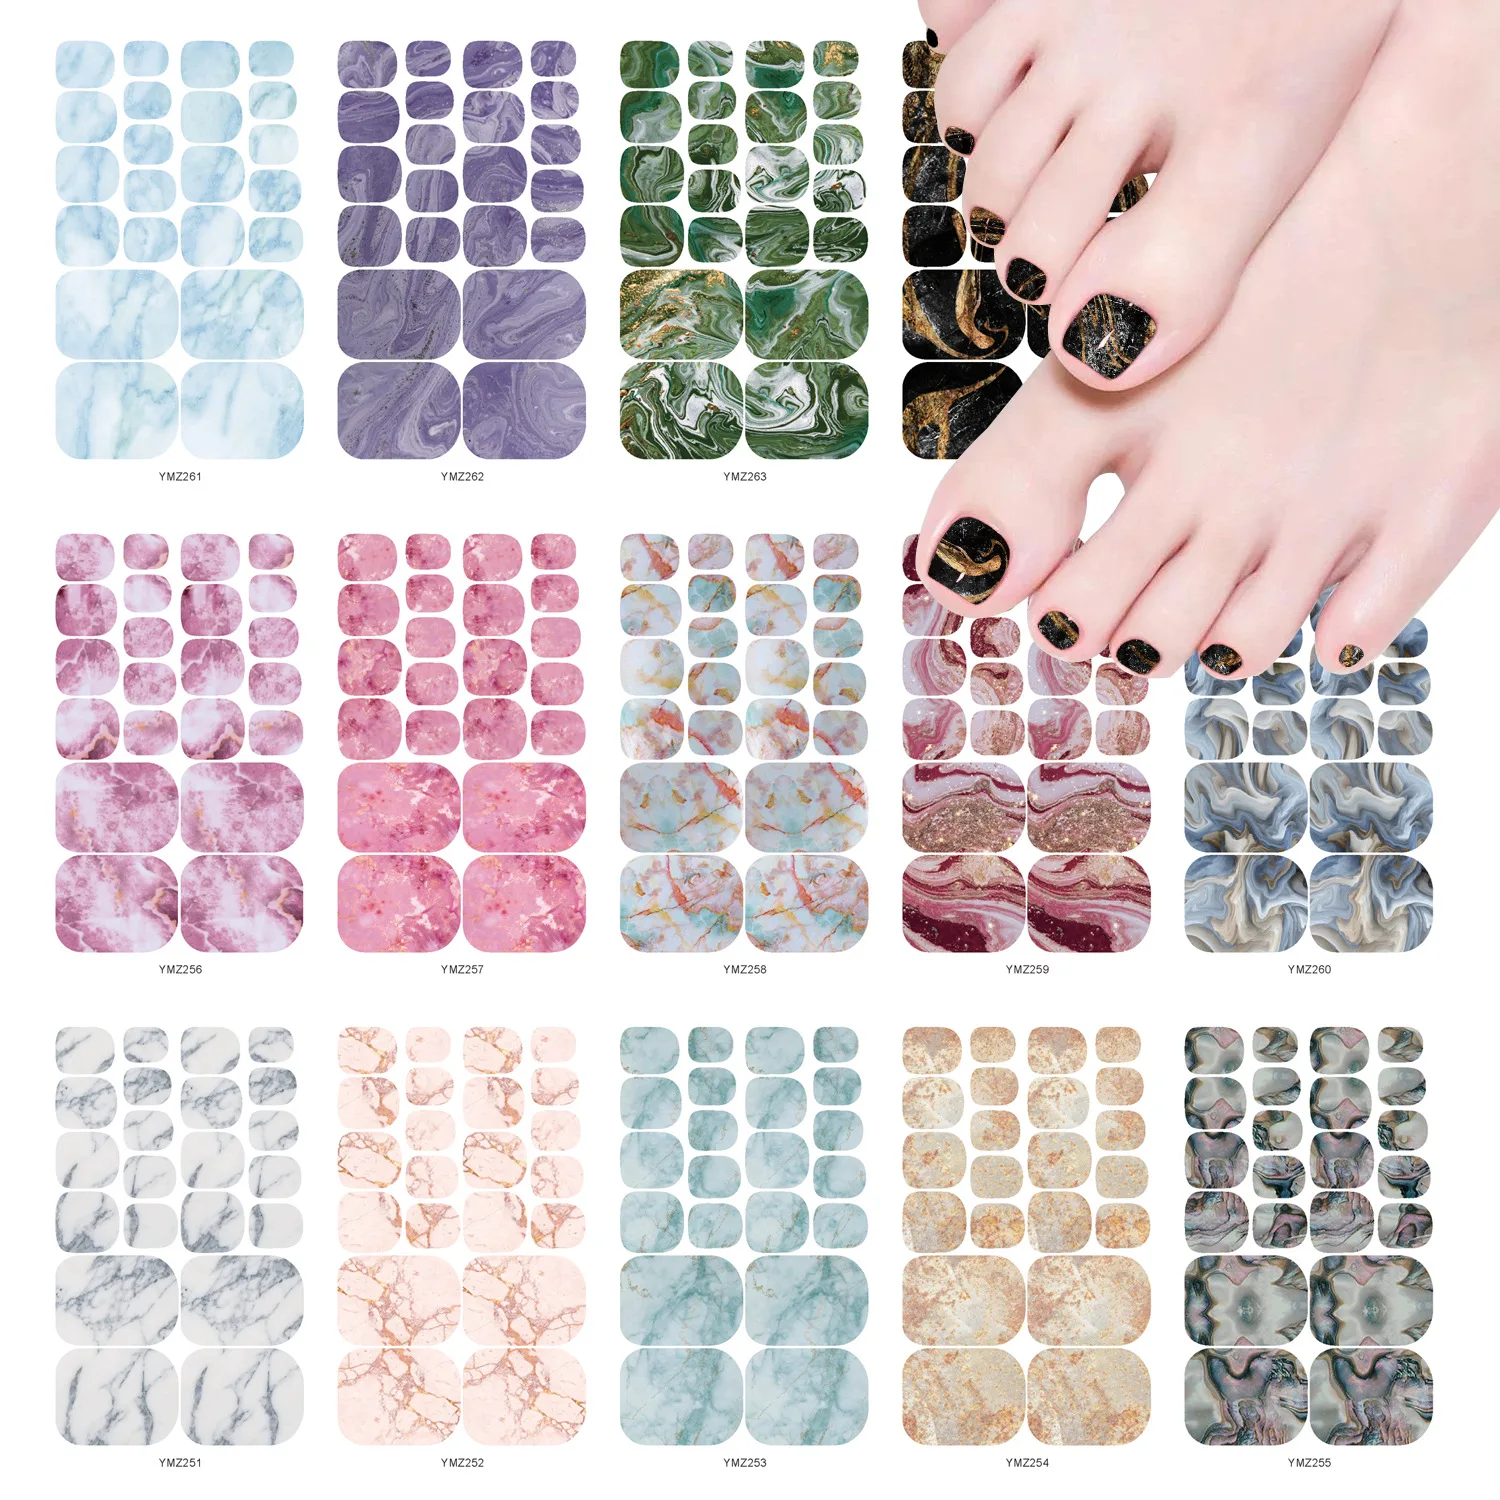 

Hot Design Nail Stickers Marble Toenail Sticker Waterproof Foot Nail Sticker and Decals Starry Wraps Nail Art Decorations